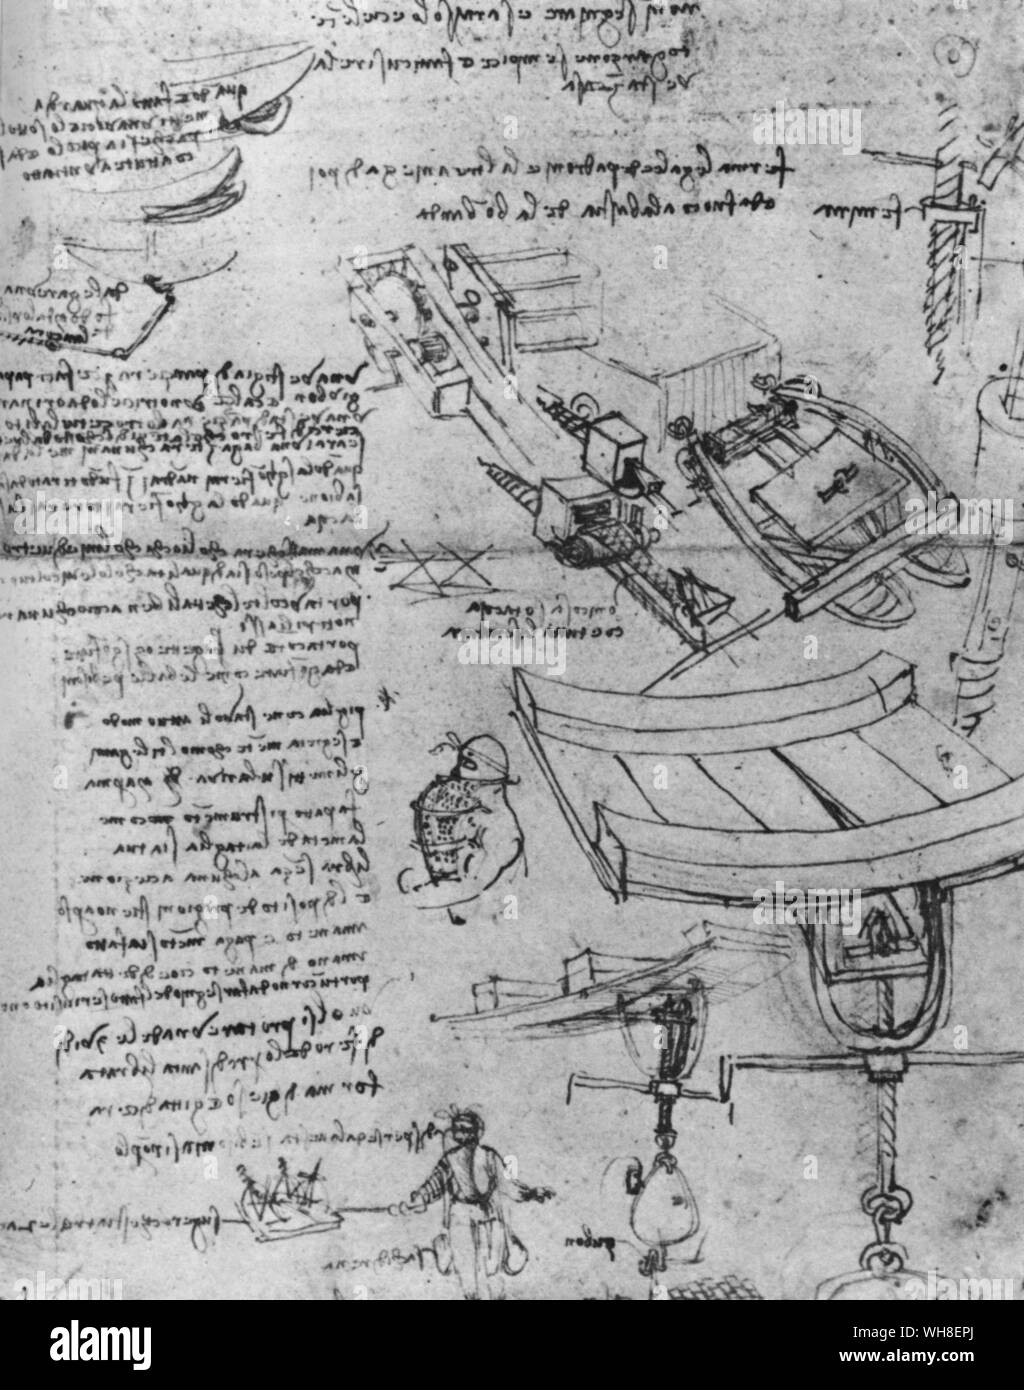 Do not impart your knowledge and you will excel alone'. All the information on this page of Leonardo's notebook dating from 1500 when he was in Venice, suggests a cloak-and-dagger operation devised by Leonardo for sinking enemy ships. At bottom left is his detailed description of a diving suit. at bottom right, his borer for holing the ships below the water line. Even his special agent is mentioned by name. Leonardo da Vinci (1452-1519) was an Italian Renaissance architect, musician, anatomist, inventor, engineer, sculptor, geometer and painter. . . Stock Photo